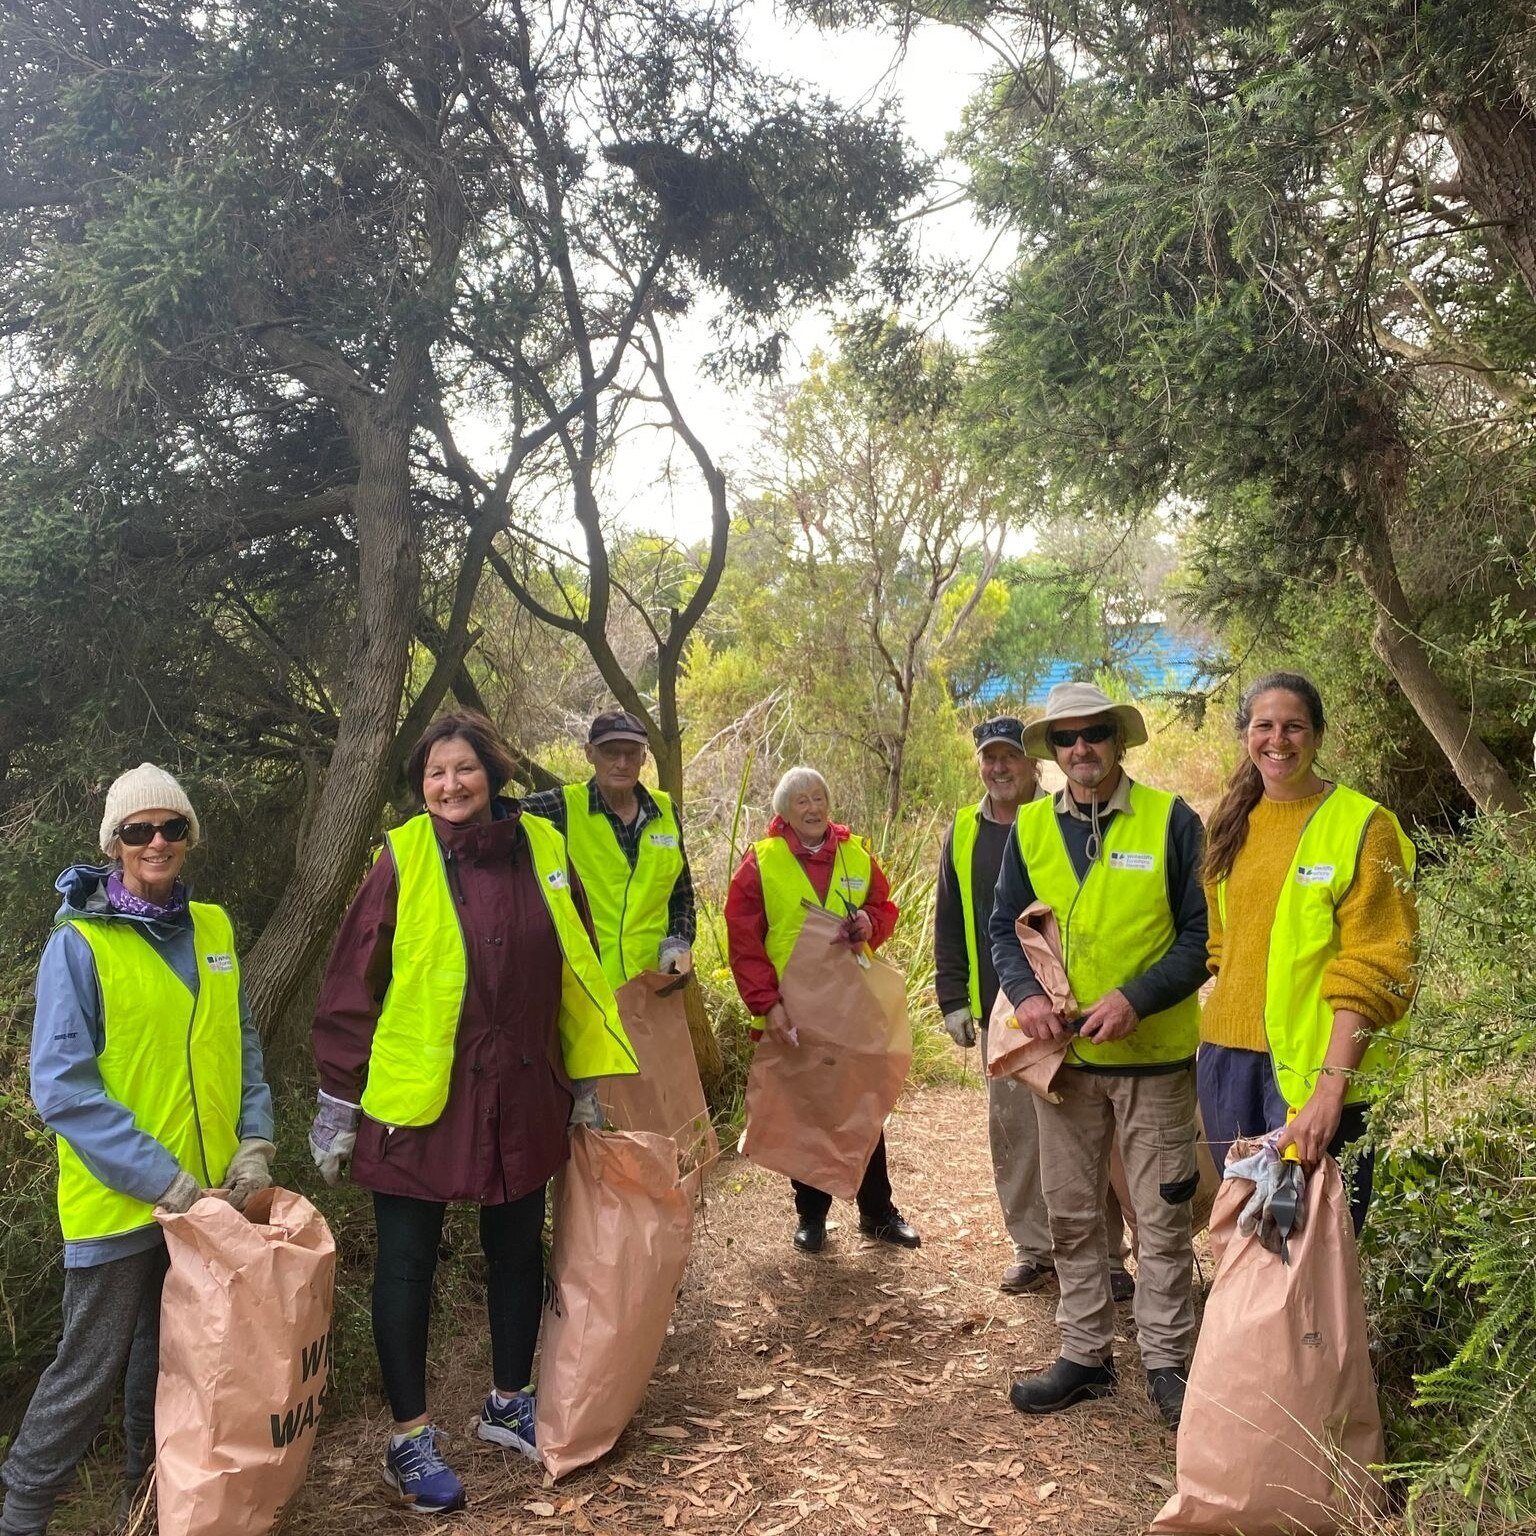 Did you know this week is National Volunteer Week? We would like to thank each and every one of the wonderful volunteers who contribute to the foreshore.